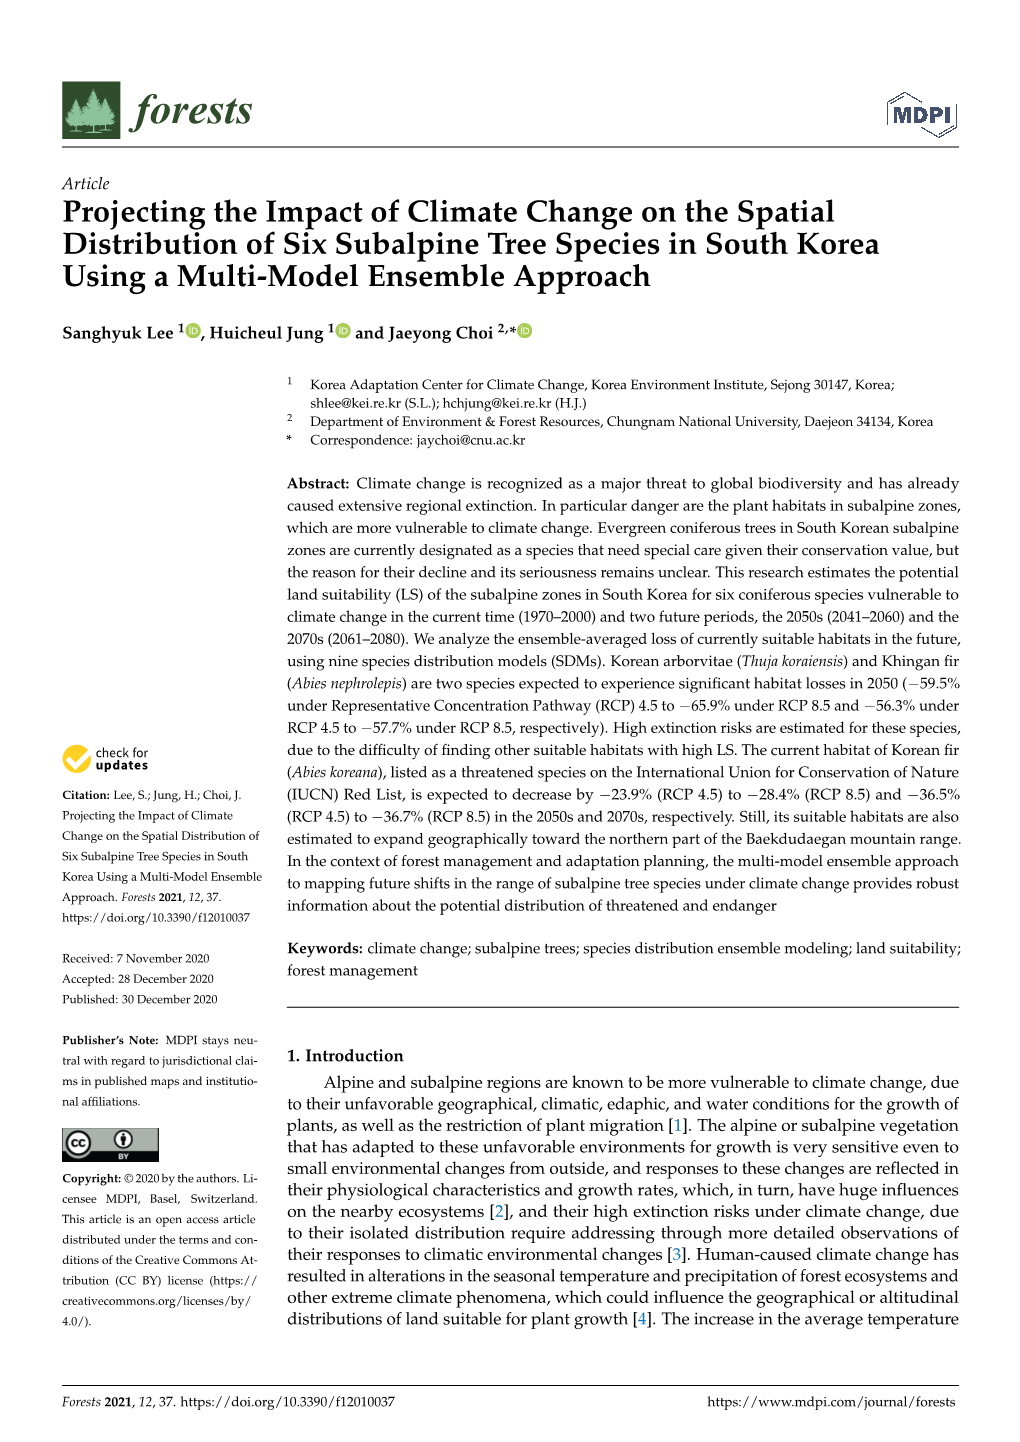 Projecting the Impact of Climate Change on the Spatial Distribution of Six Subalpine Tree Species in South Korea Using a Multi-Model Ensemble Approach